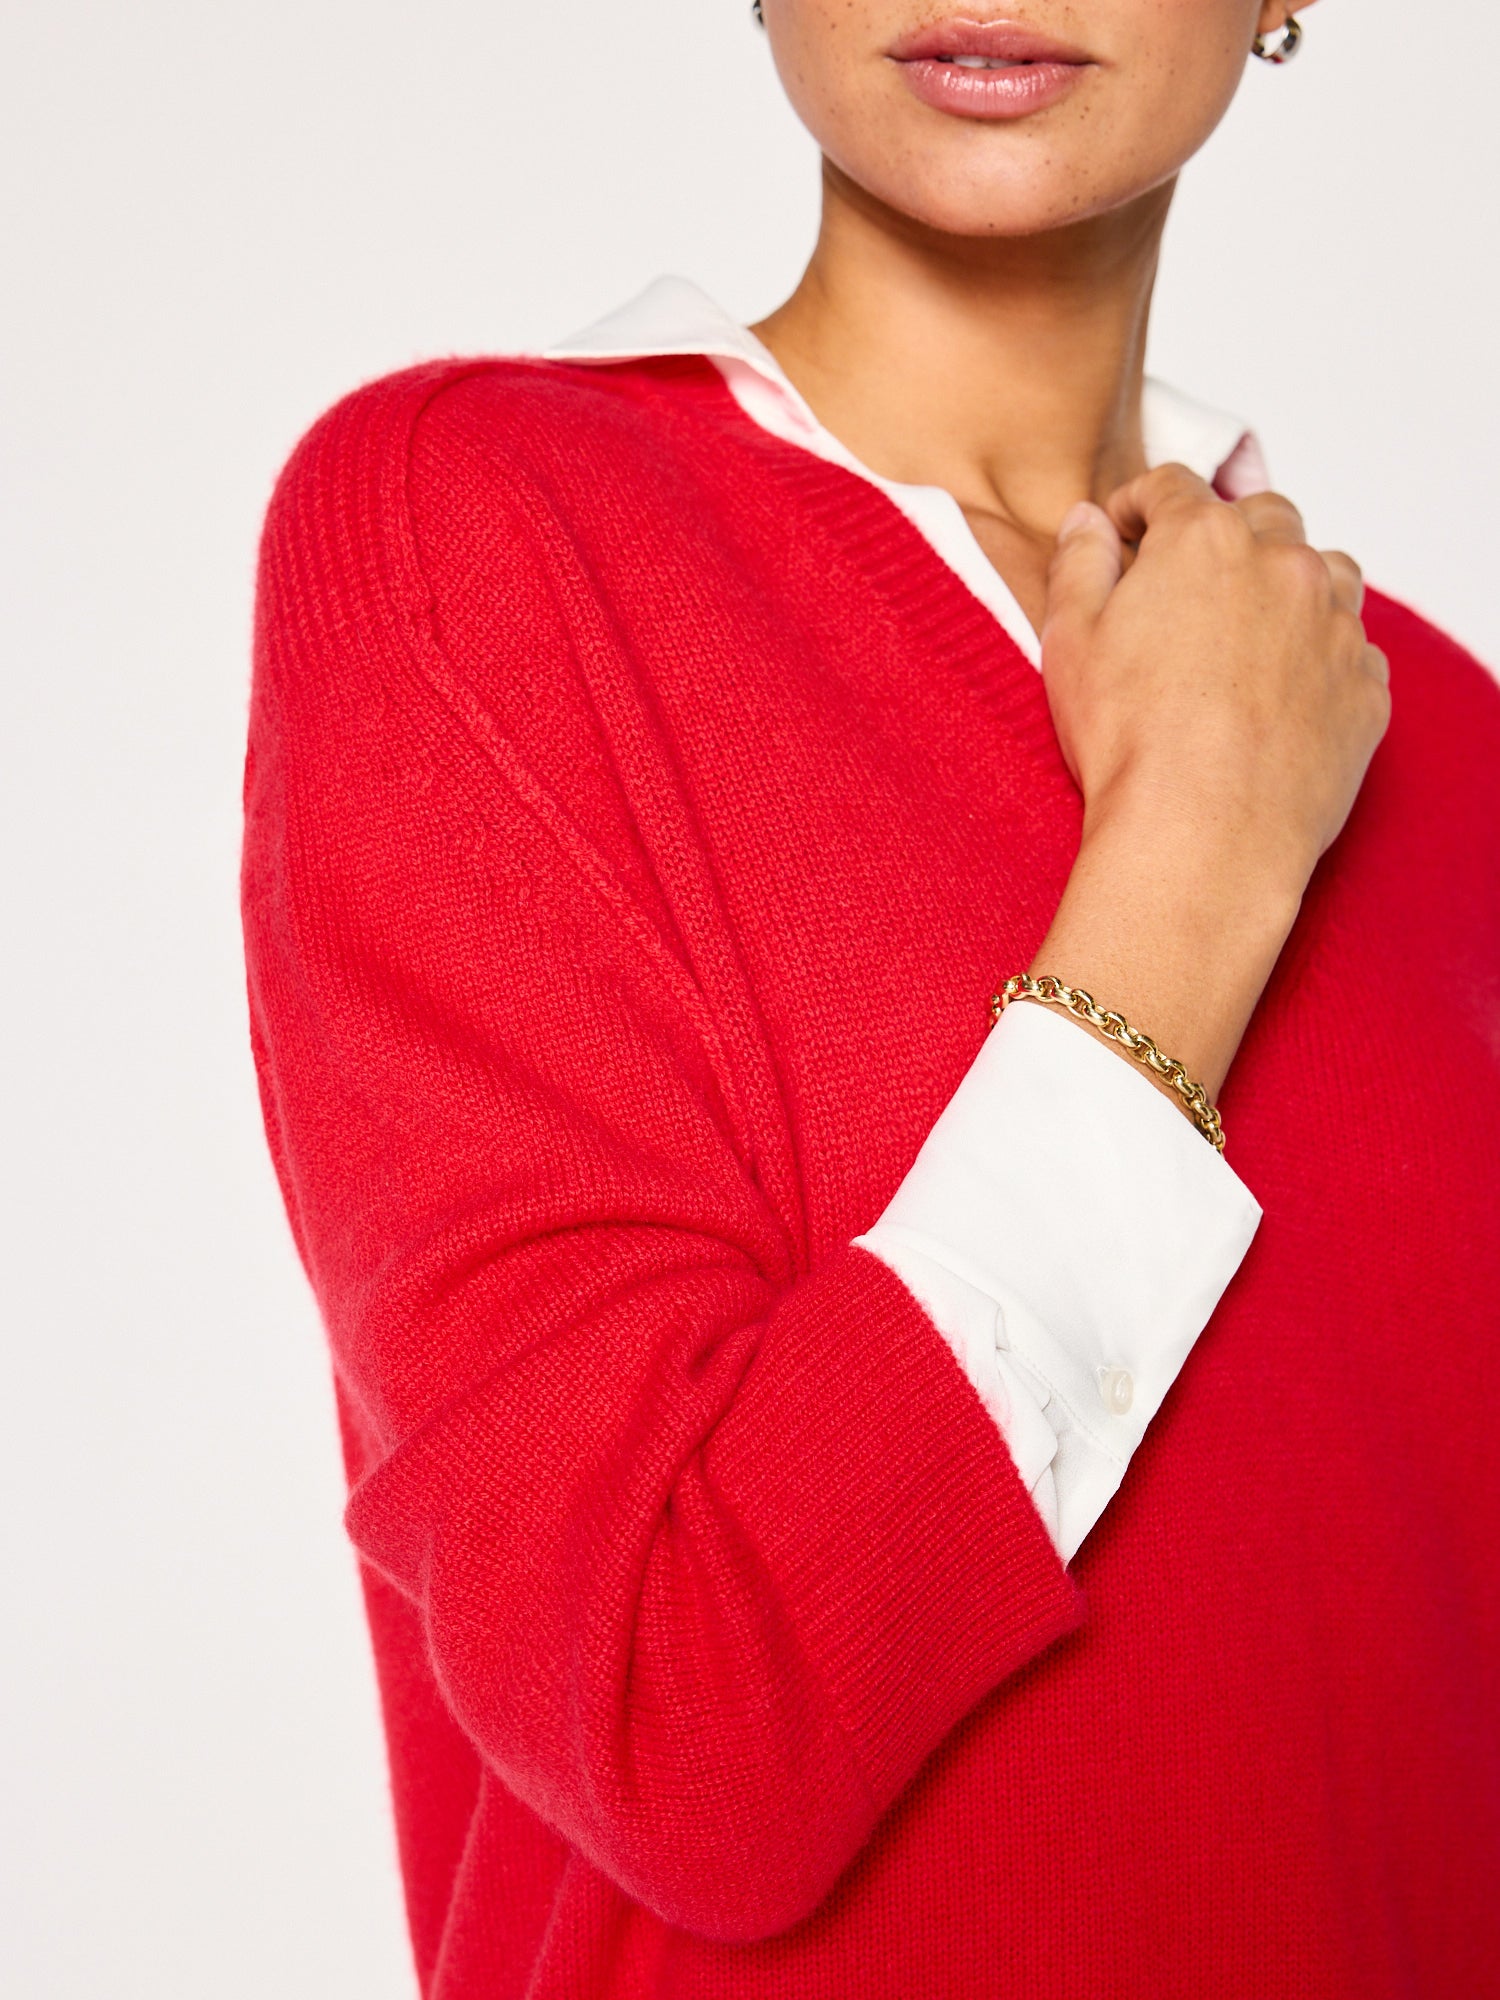 Looker red layered v-neck sweater close up